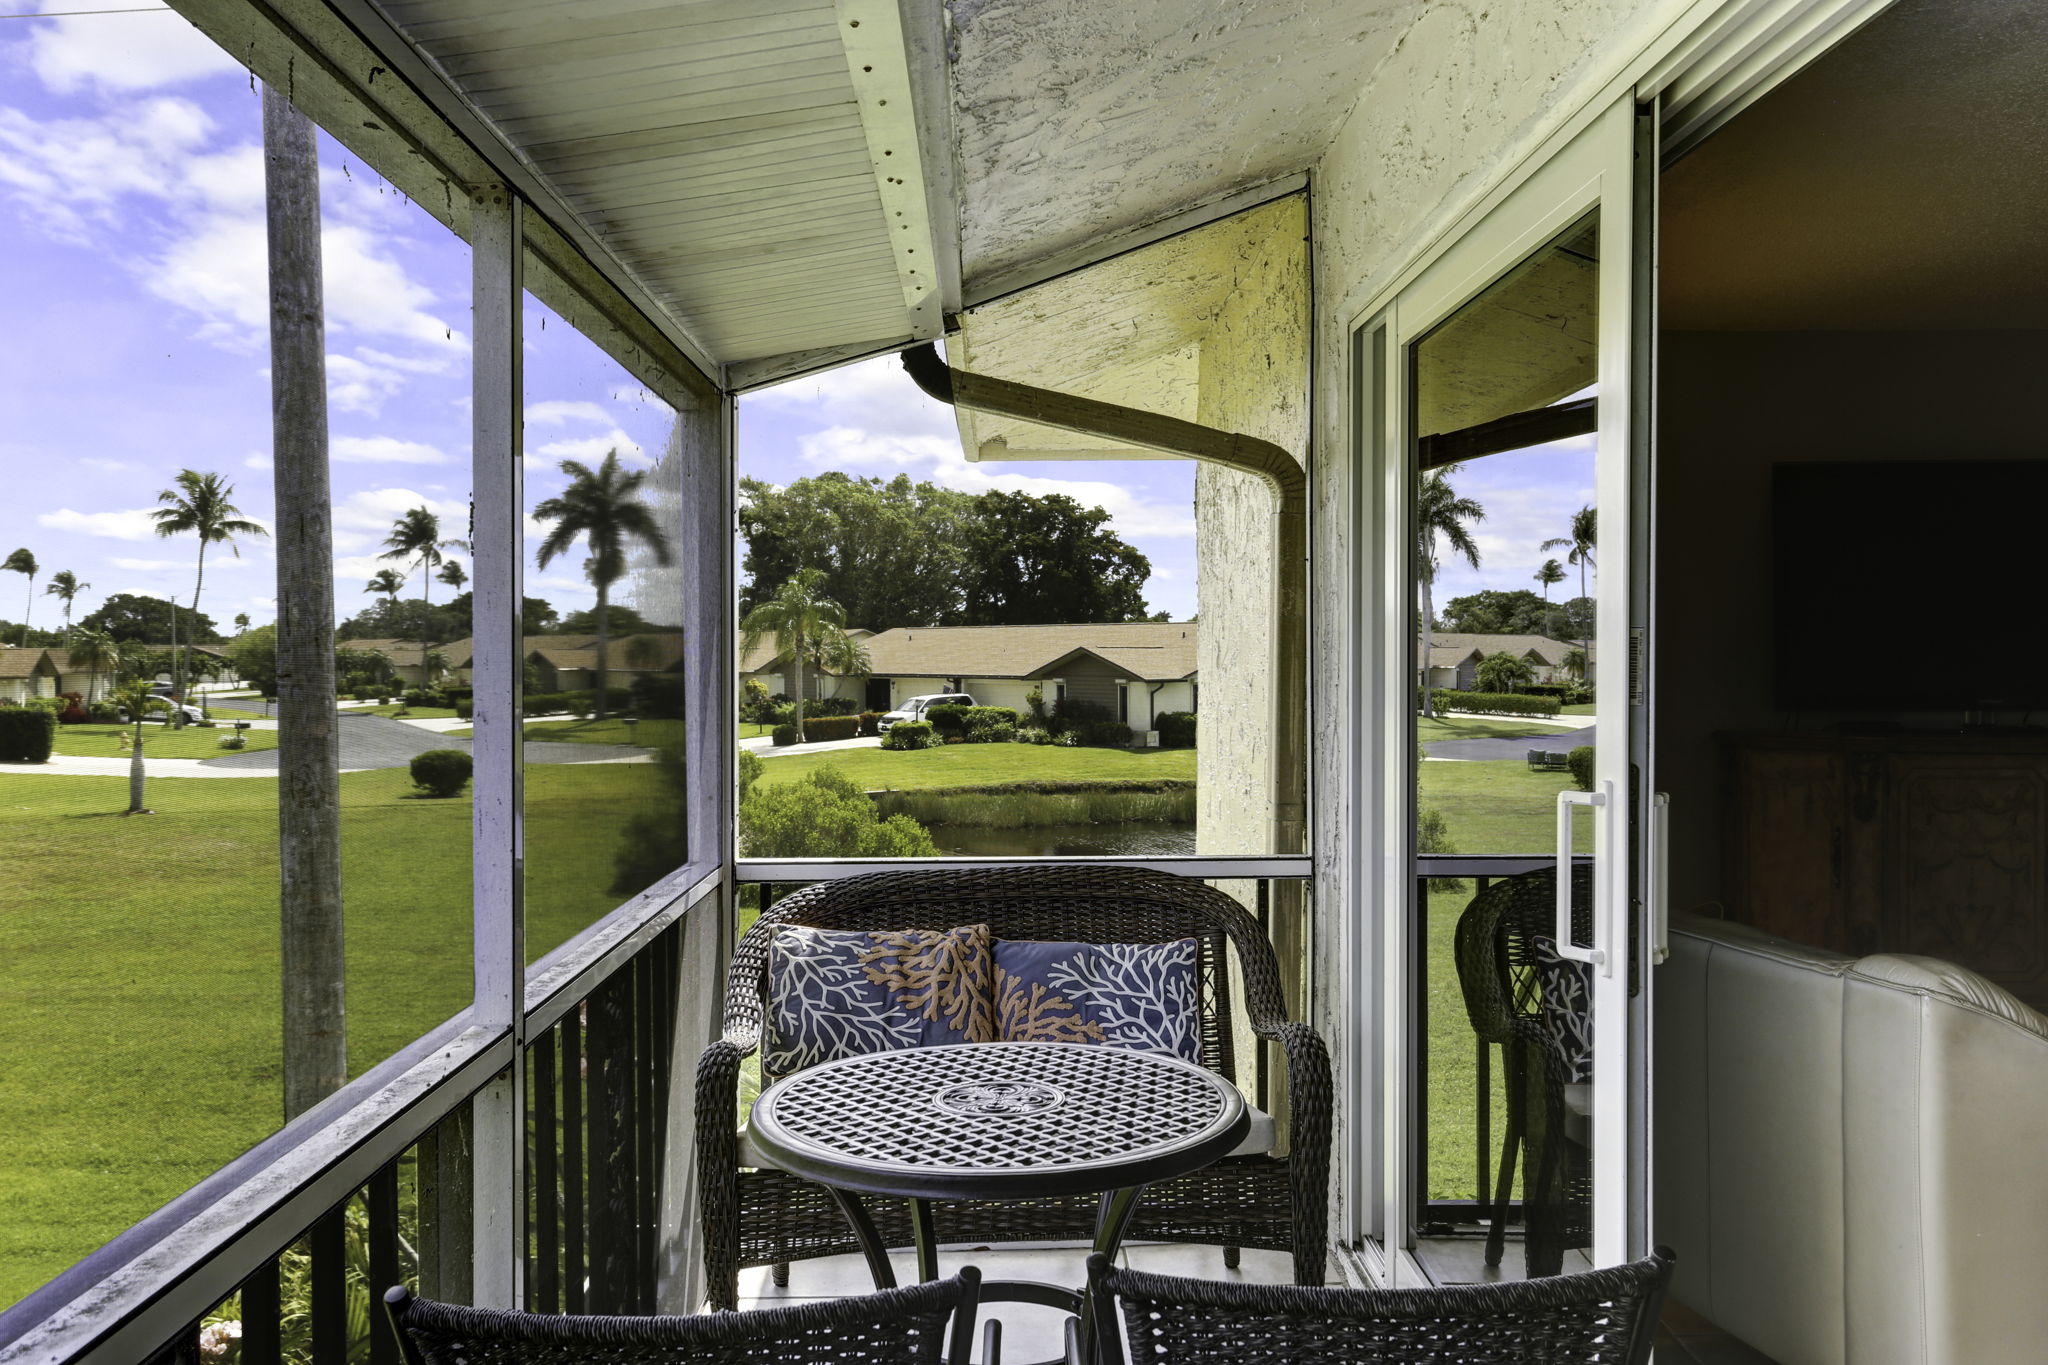 355 Palm Dr # 732, Naples - relax after a busy day